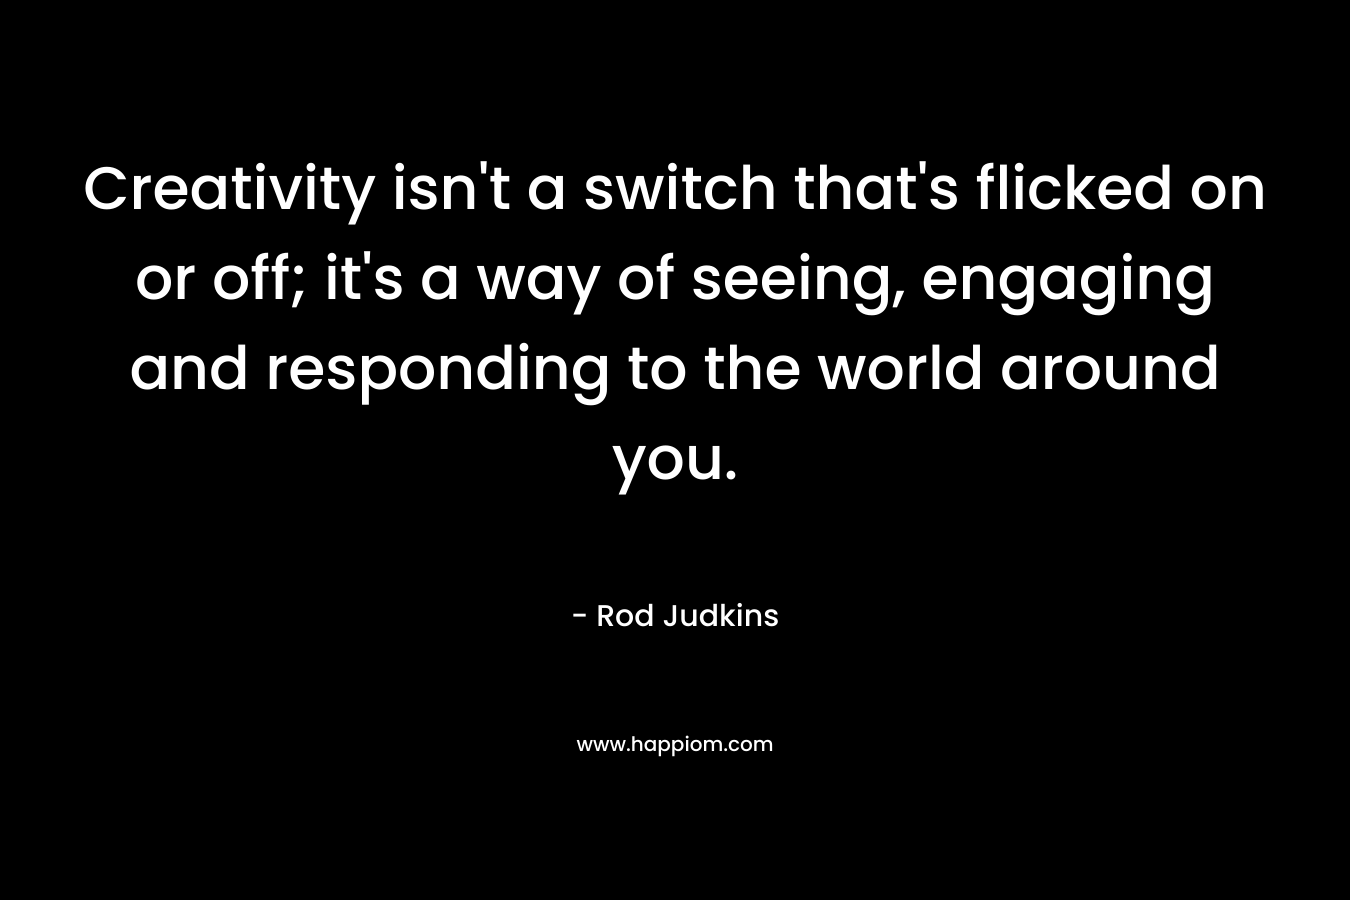 Creativity isn’t a switch that’s flicked on or off; it’s a way of seeing, engaging and responding to the world around you. – Rod Judkins